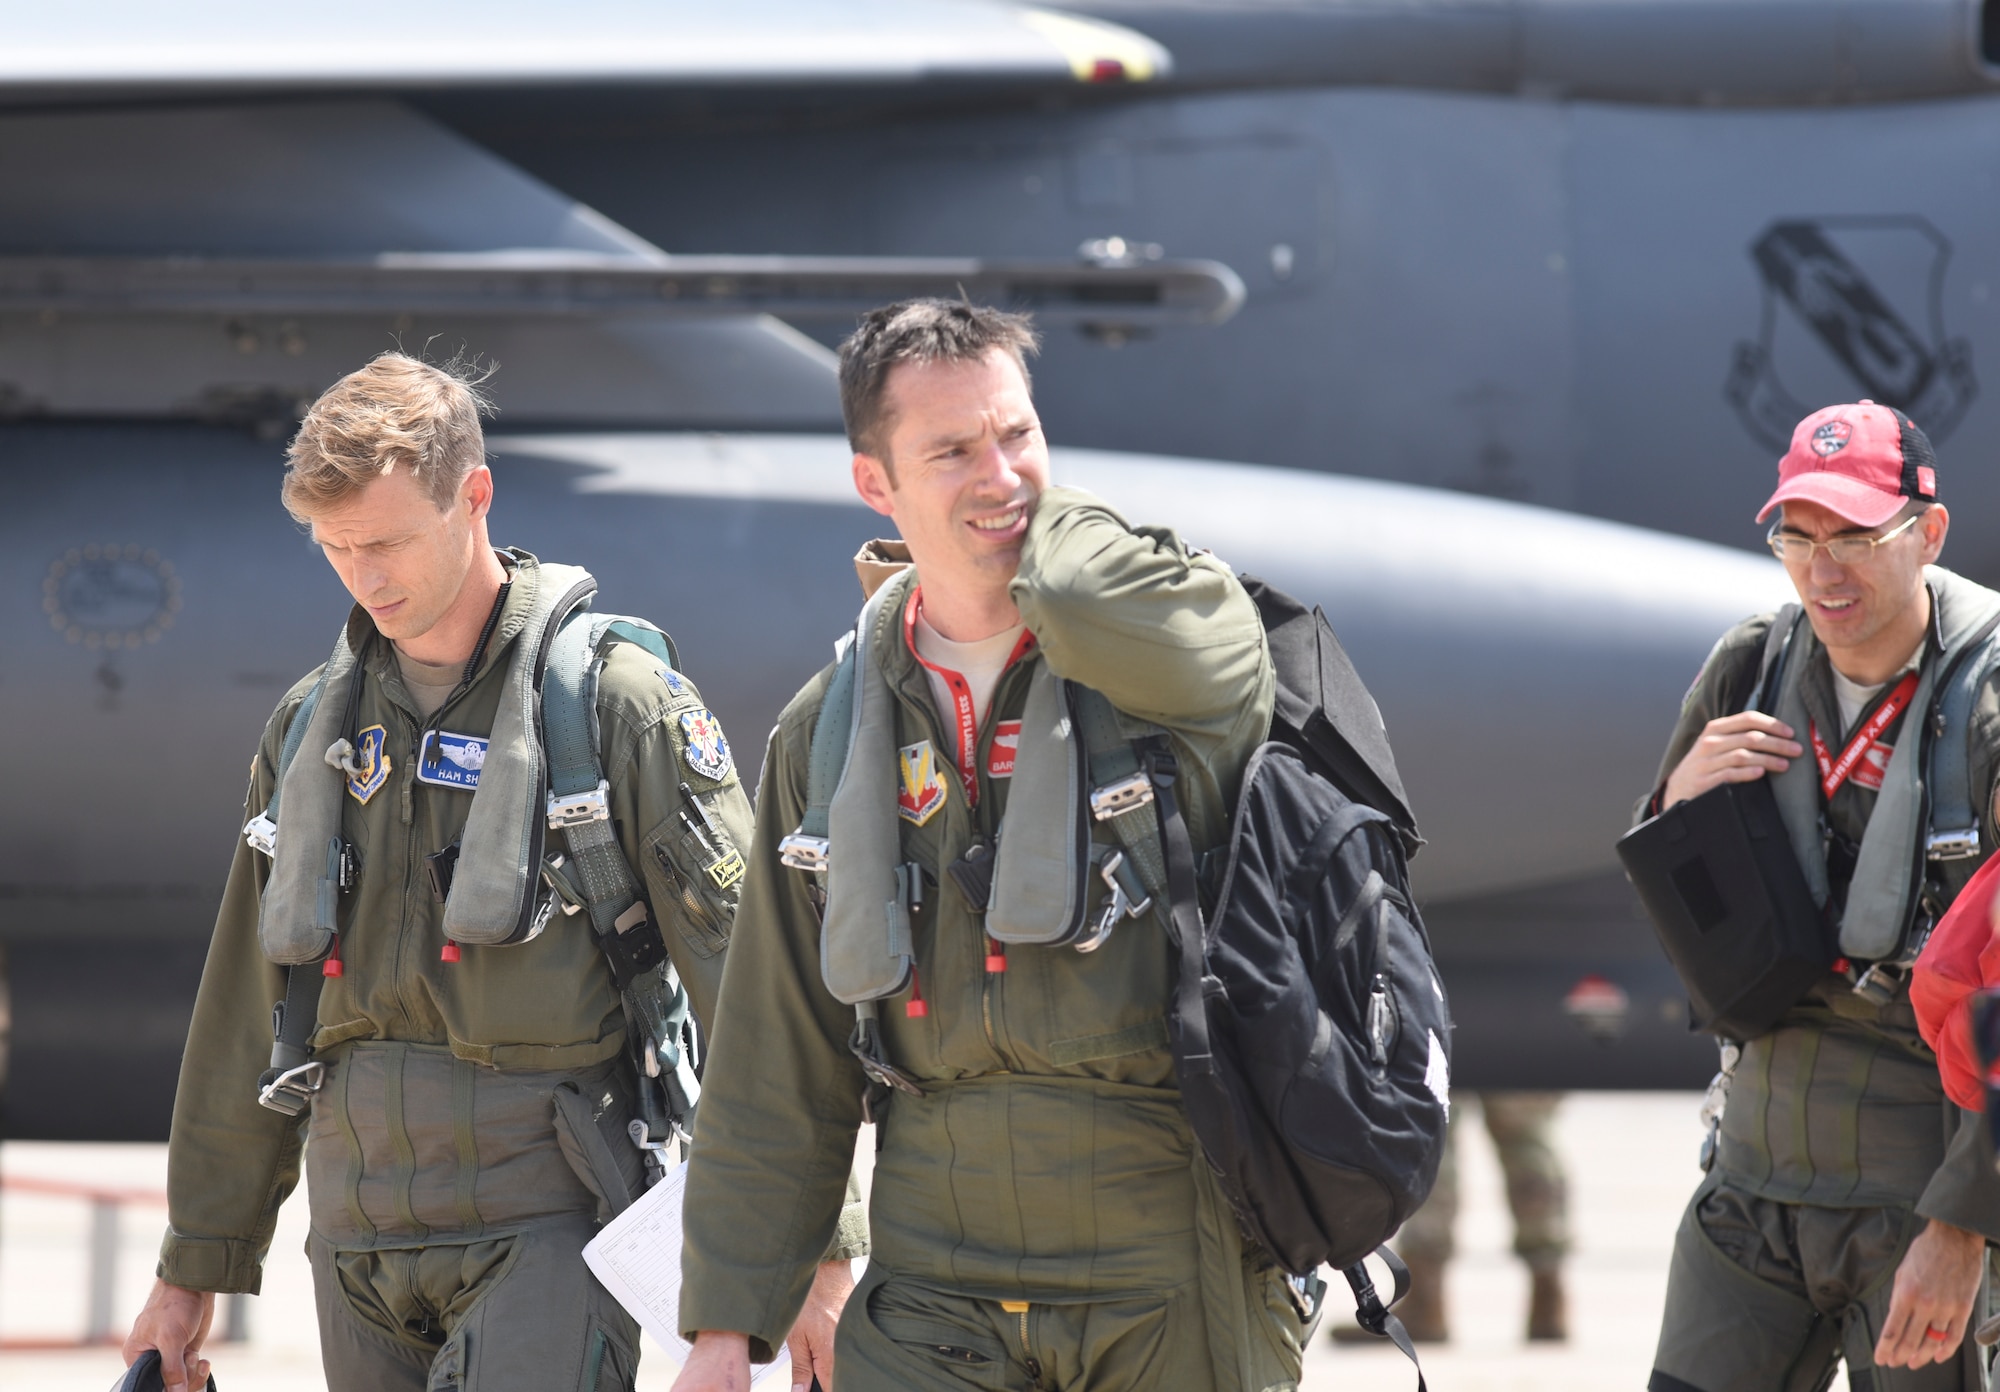 F-15E Strike Eagle aircrew from the 4th Fighter Wing, Seymour-Johnson Air Force Base, North Carolina, walk from the flight line after arriving at Tinker AFB, Oklahoma as part of a mass-relocation of vulnerable aircraft to escape Hurricane Dorian's path Sept. 4, 2019, Tinker AFB, Oklahoma. Team Tinker executed an existing agreement with Seymour-Johnson AFB, North Carolina and Warner-Robins AFB, Georgia to host fighters, tankers and reconnaissance aircraft far away from the devastating hurricane currently impacting the East Coast of the United States. (U.S. Air Force photo/Greg L. Davis)